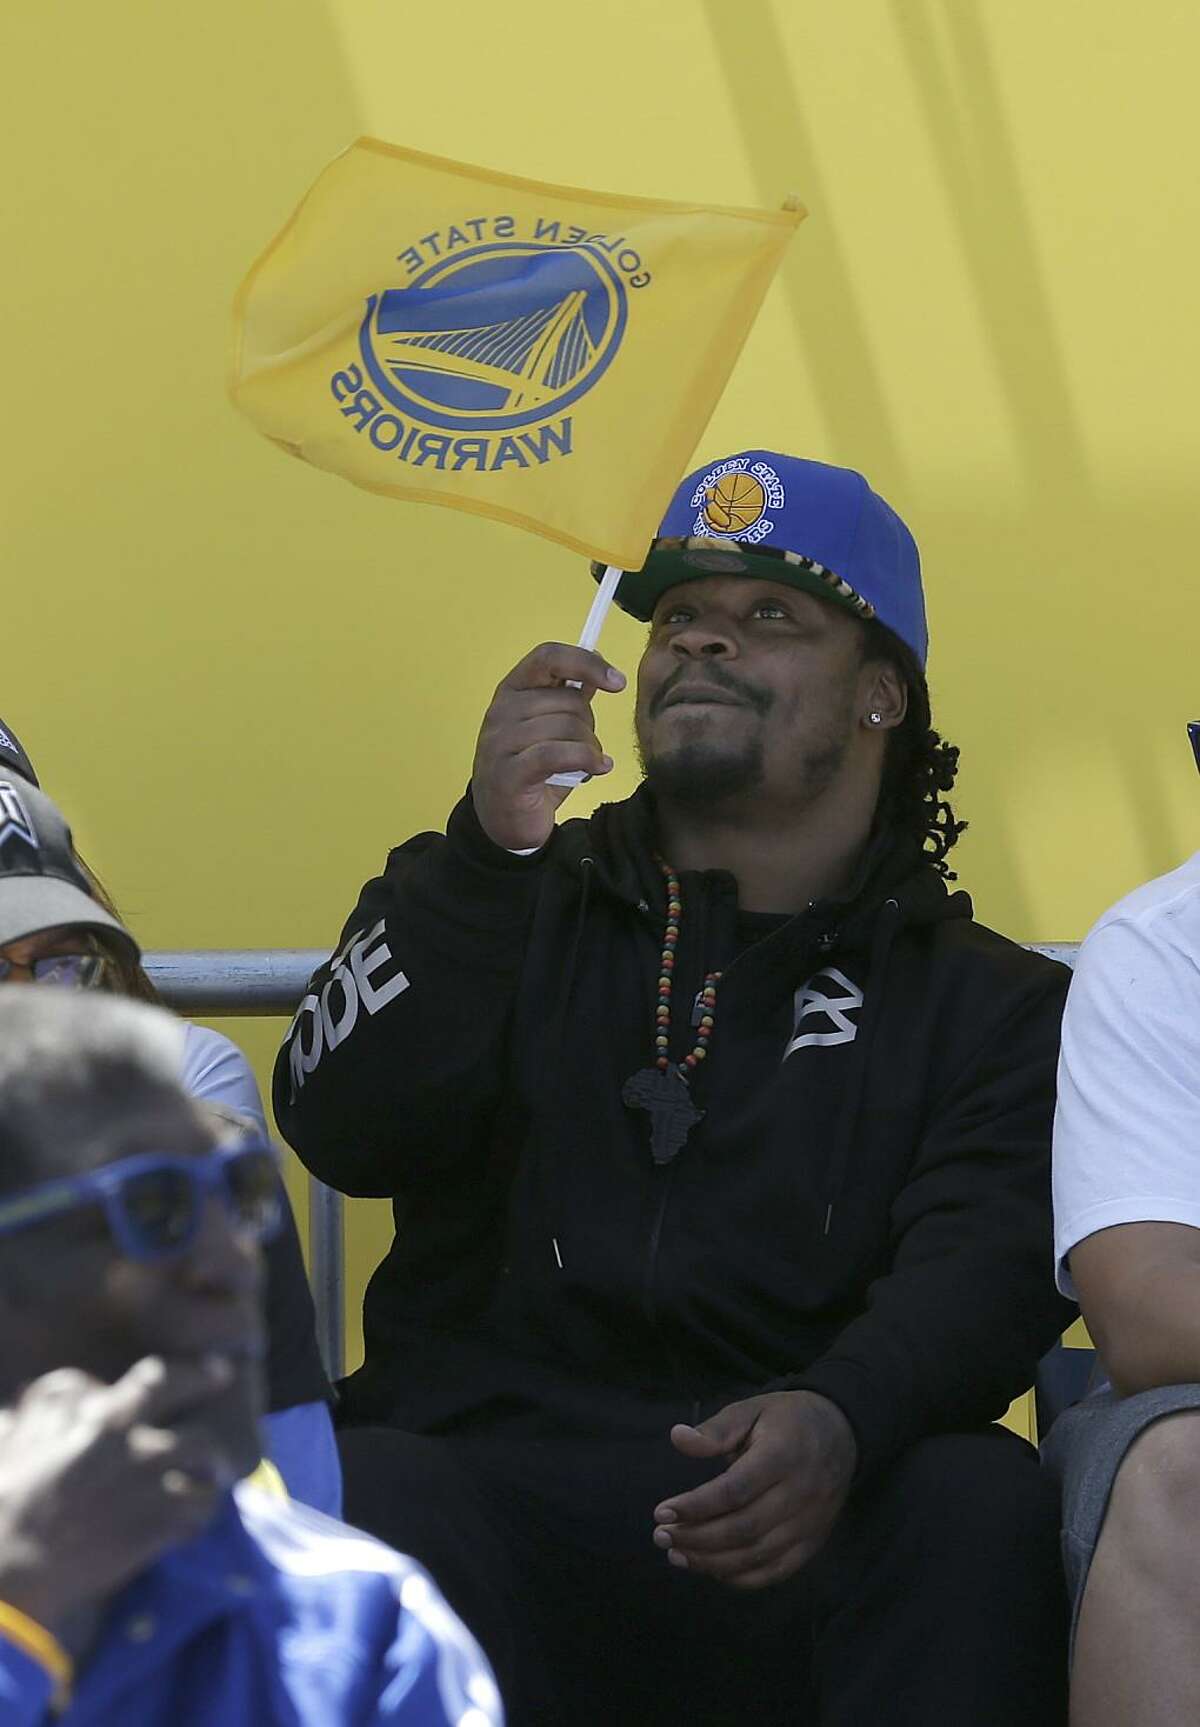 Seattle Seahawks running back Marshawn Lynch waves a Golden State Warriors flag during a rally for the Warriors winning the NBA championship in Oakland, Calif., Friday, June 19, 2015. (AP Photo/Jeff Chiu)